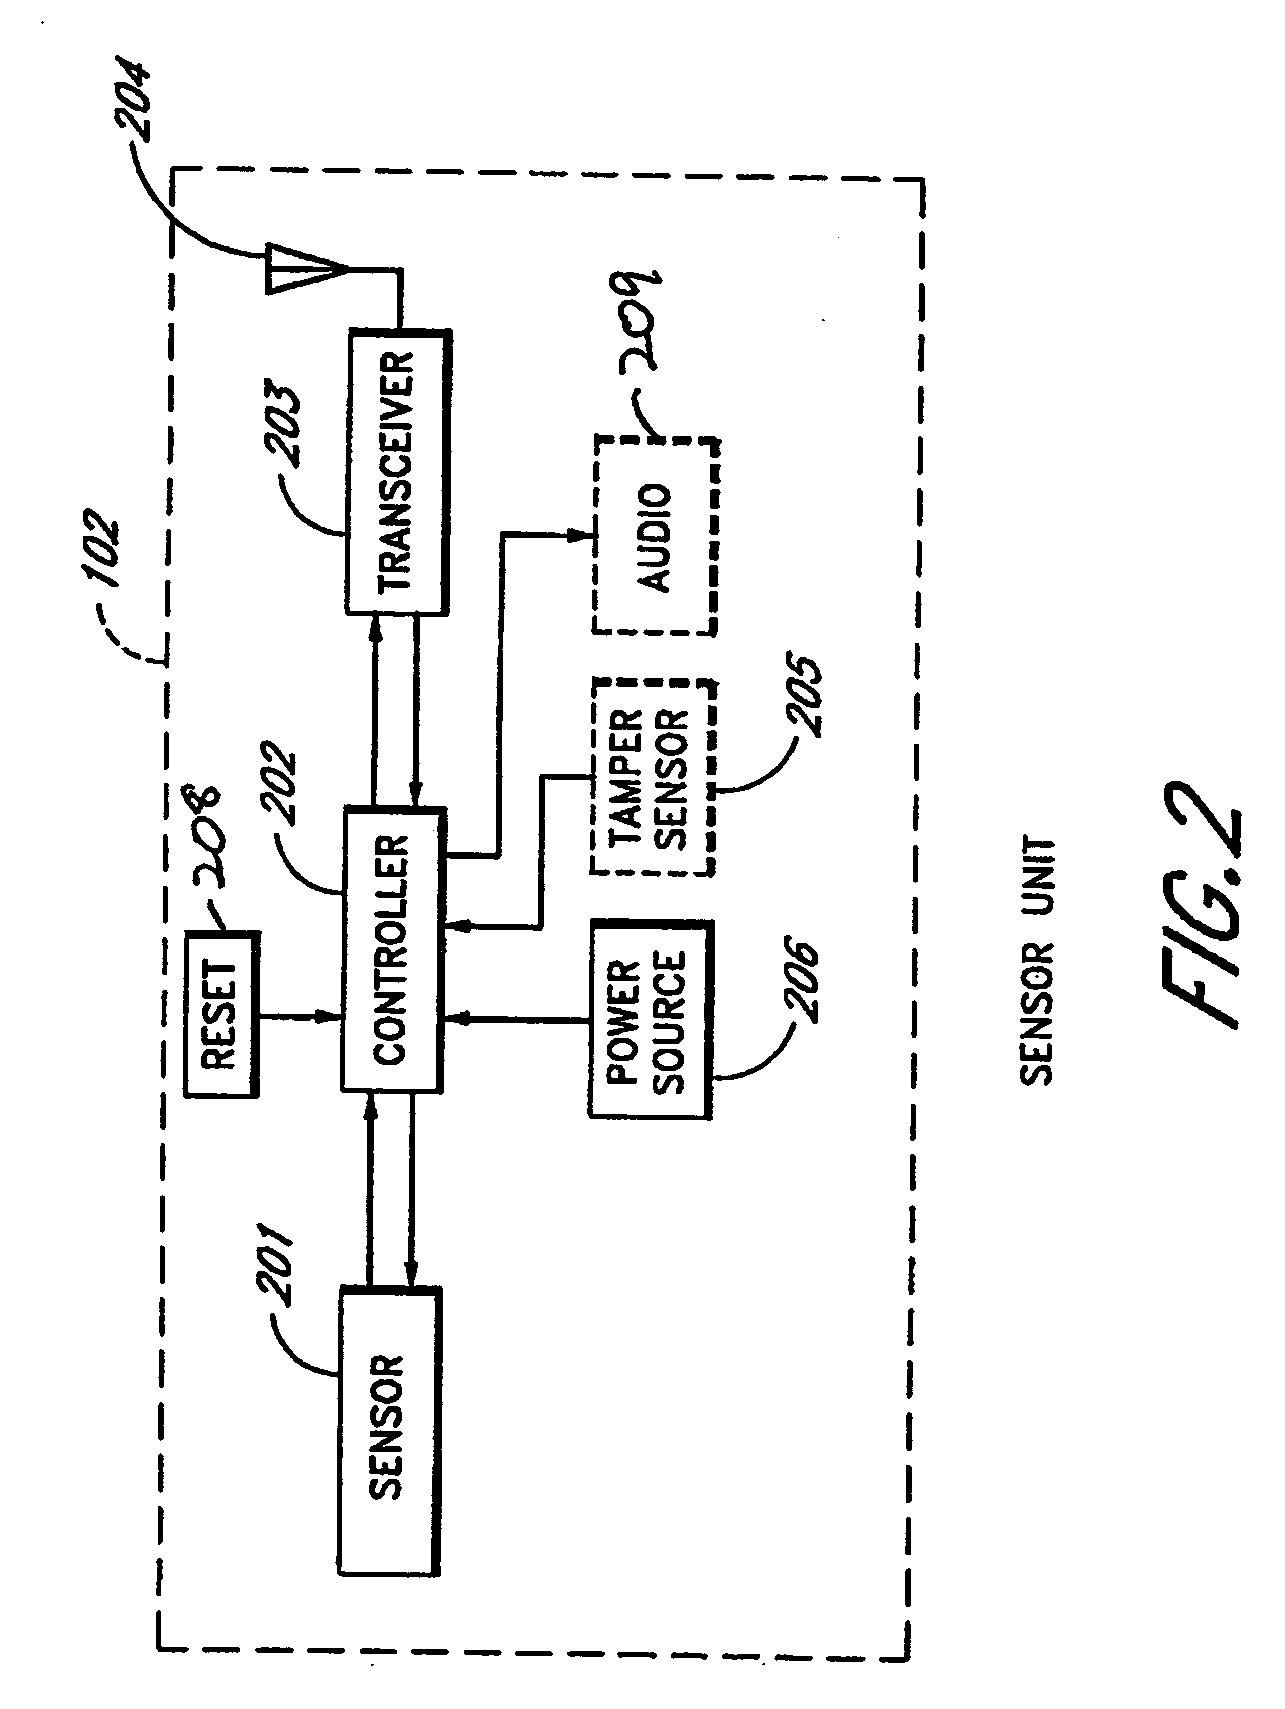 Wireless repeater for sensor system